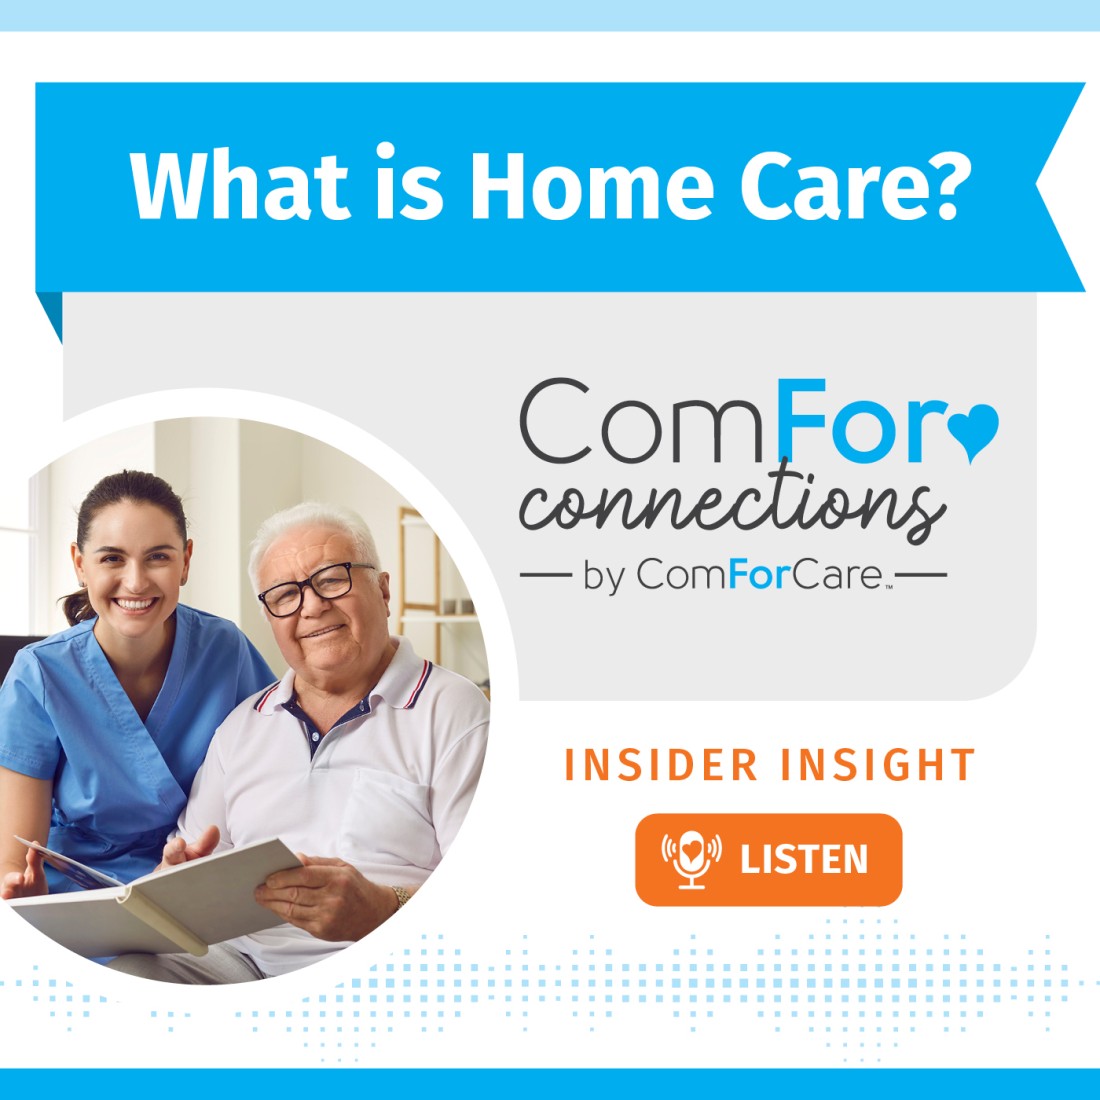 Home Care Podcast | Home Care Resources | ComForCare - CFC_Social_Media__What_is_Home_Care_